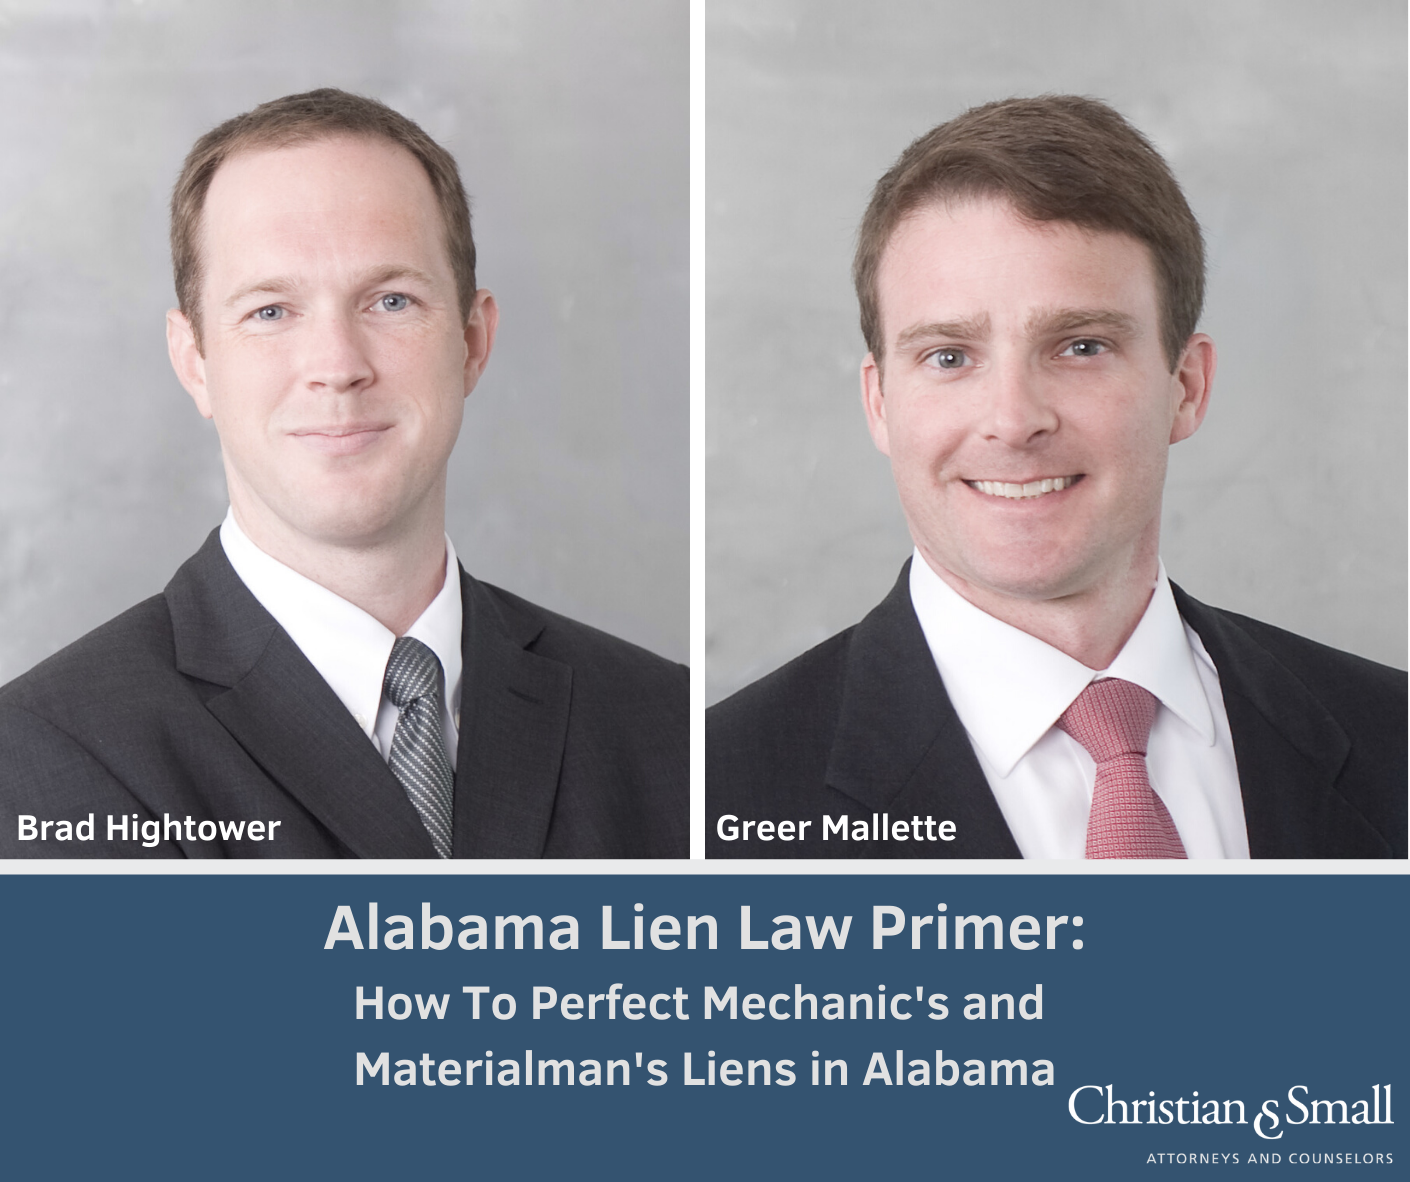 Alabama Lien Law Primer: How To Perfect Mechanic’s and Materialman’s Liens in Alabama